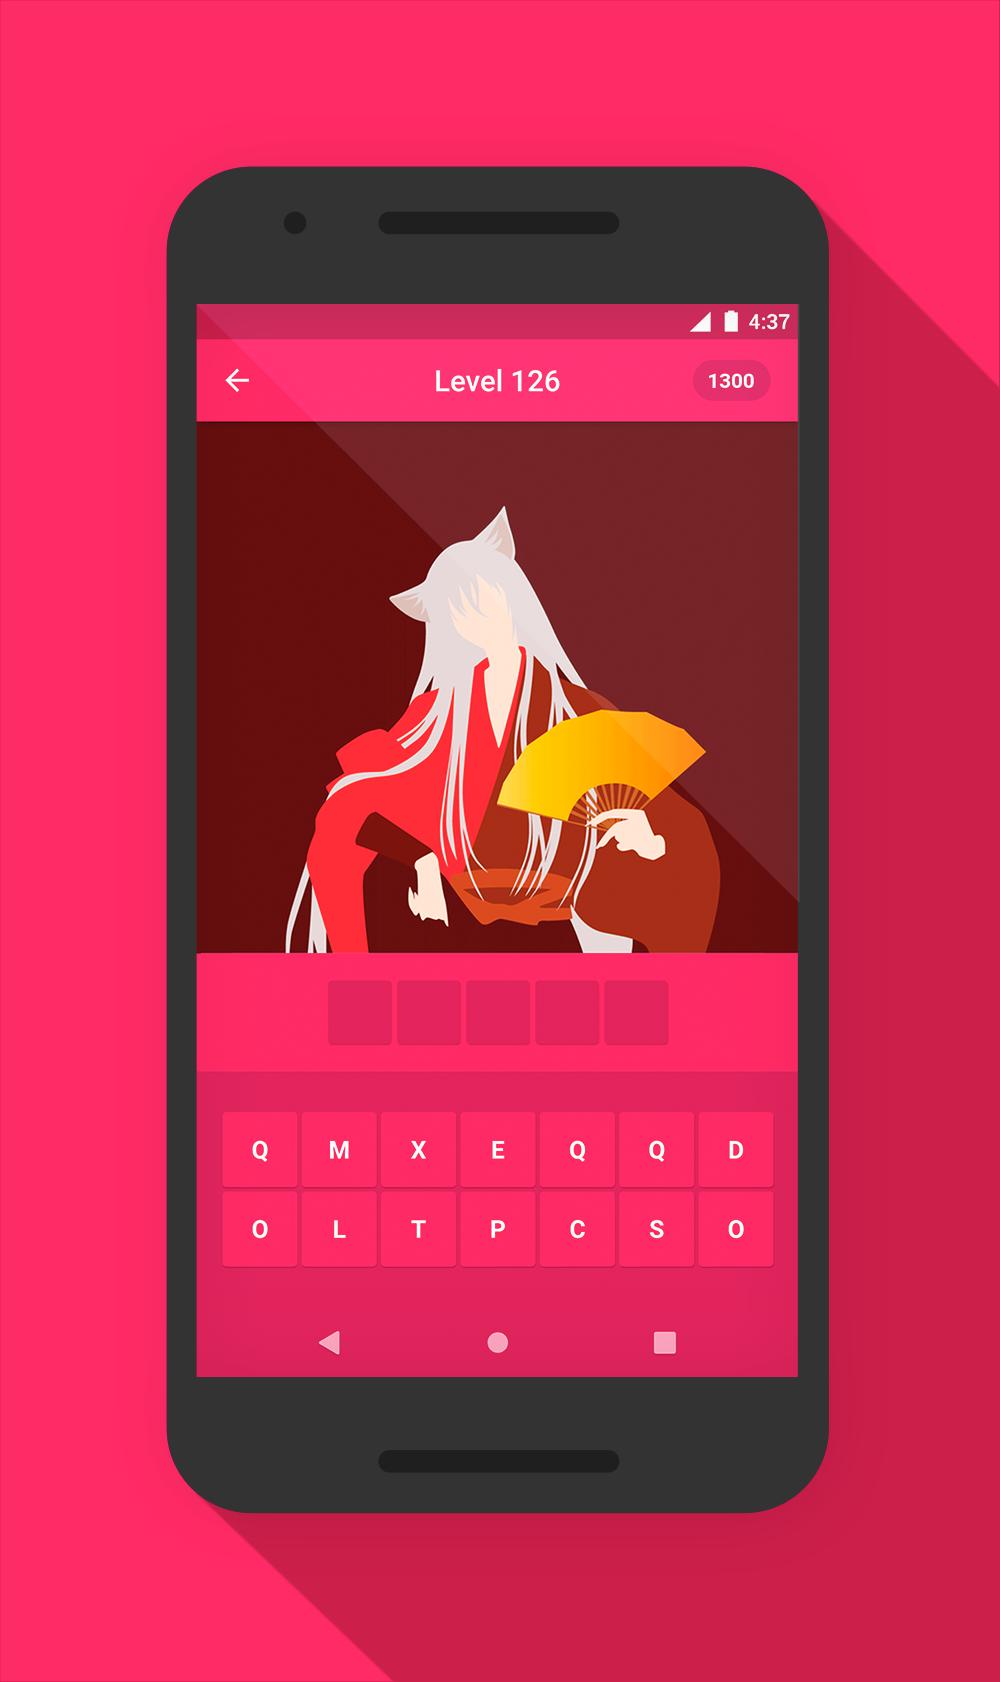 Guess anime hero for Android - APK Download